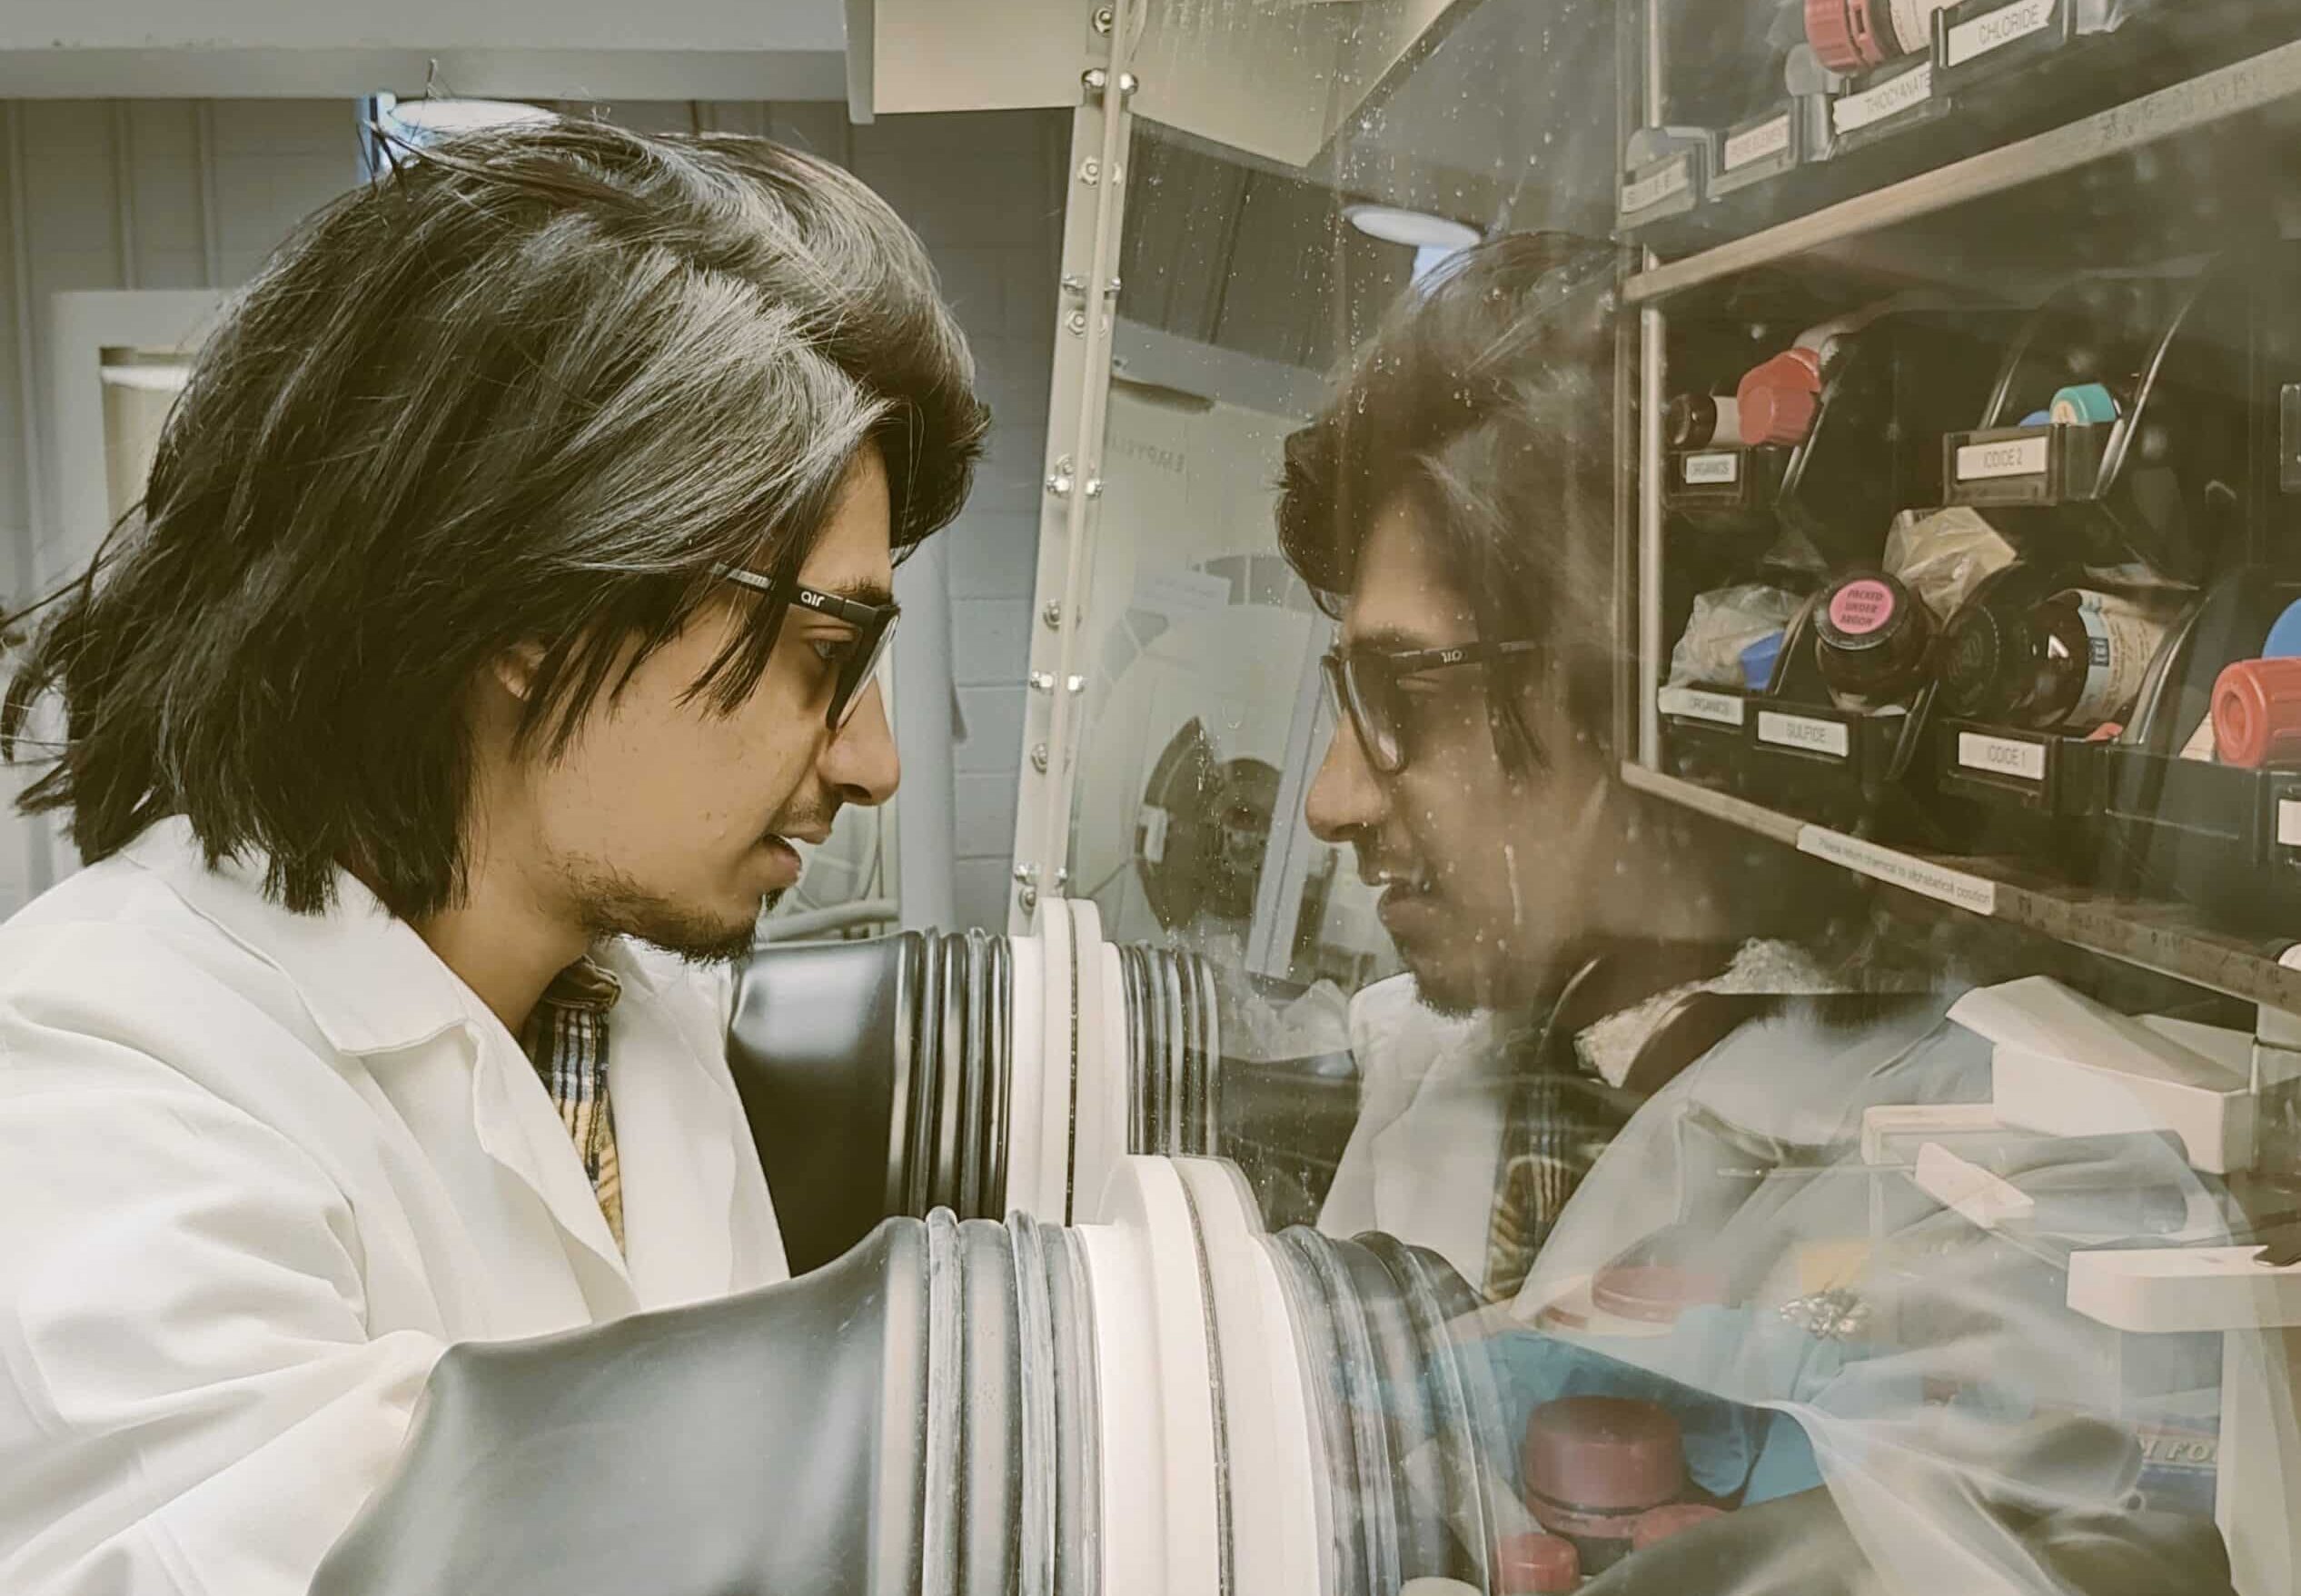 Graduate student Akash Singh working in a lab